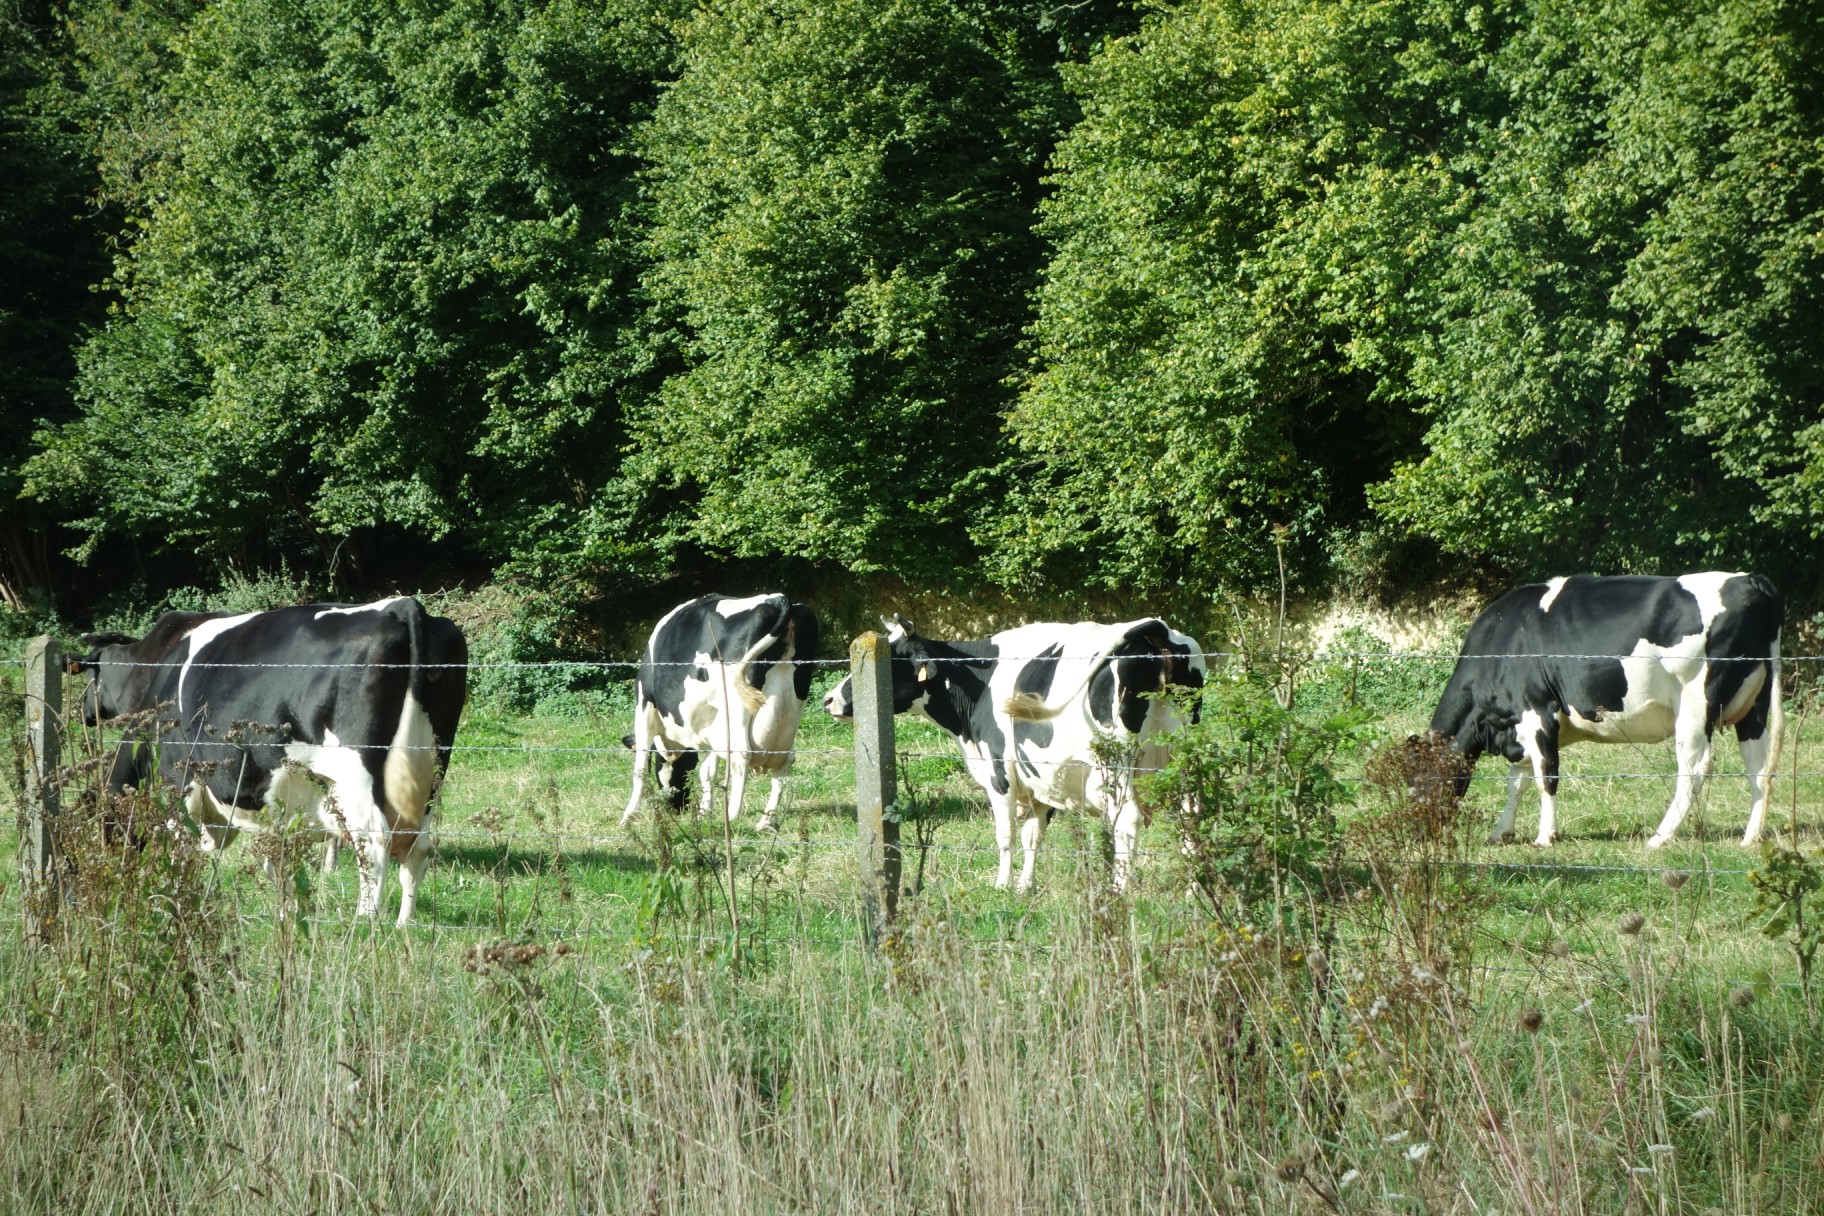 More dairy cows in Normandy